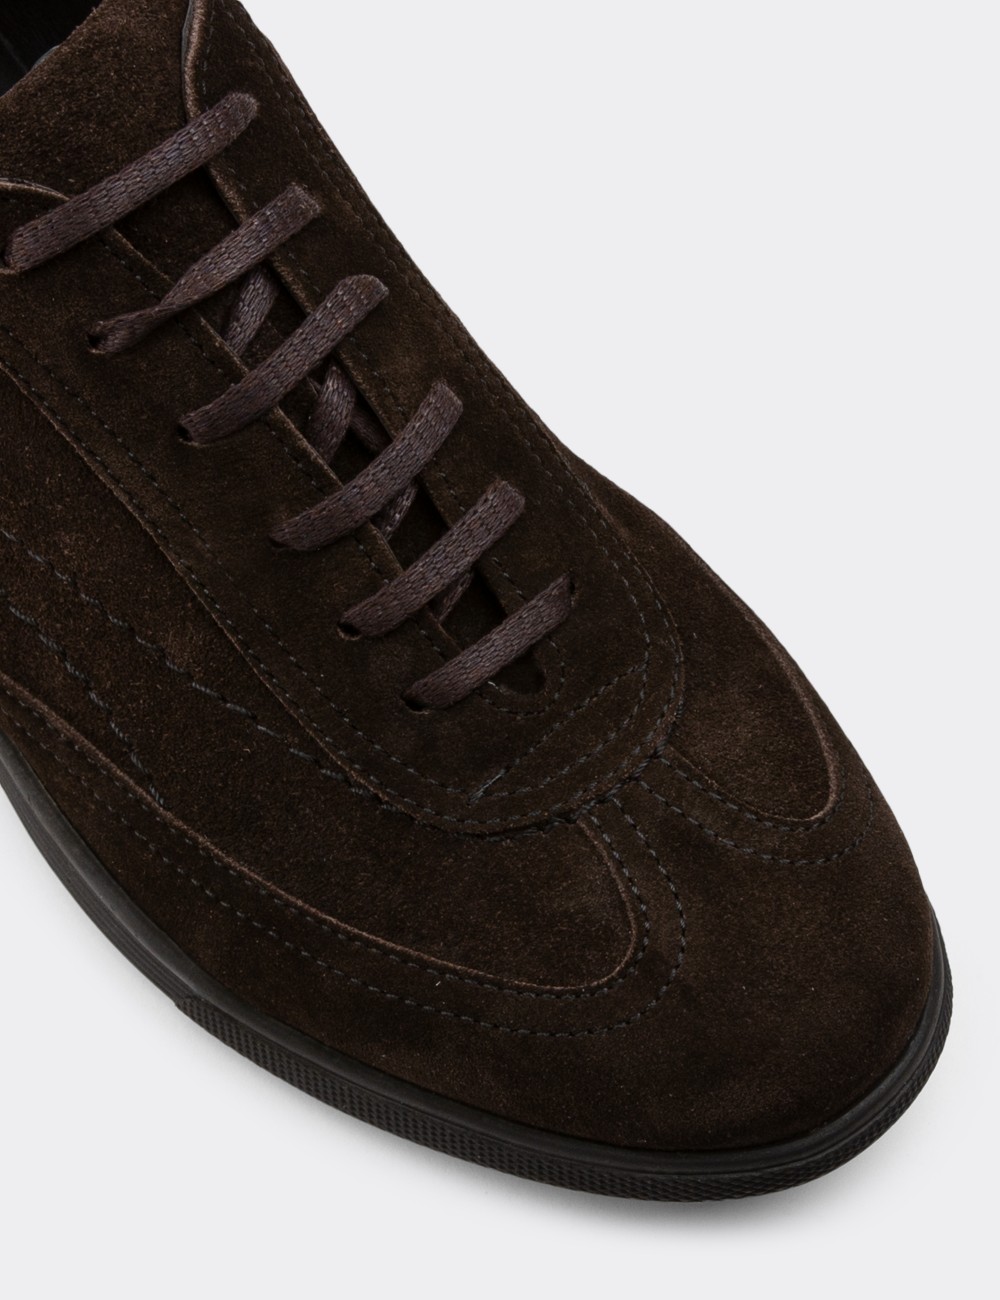 Brown Suede Leather Lace-up Shoes - 00321MKHVC08